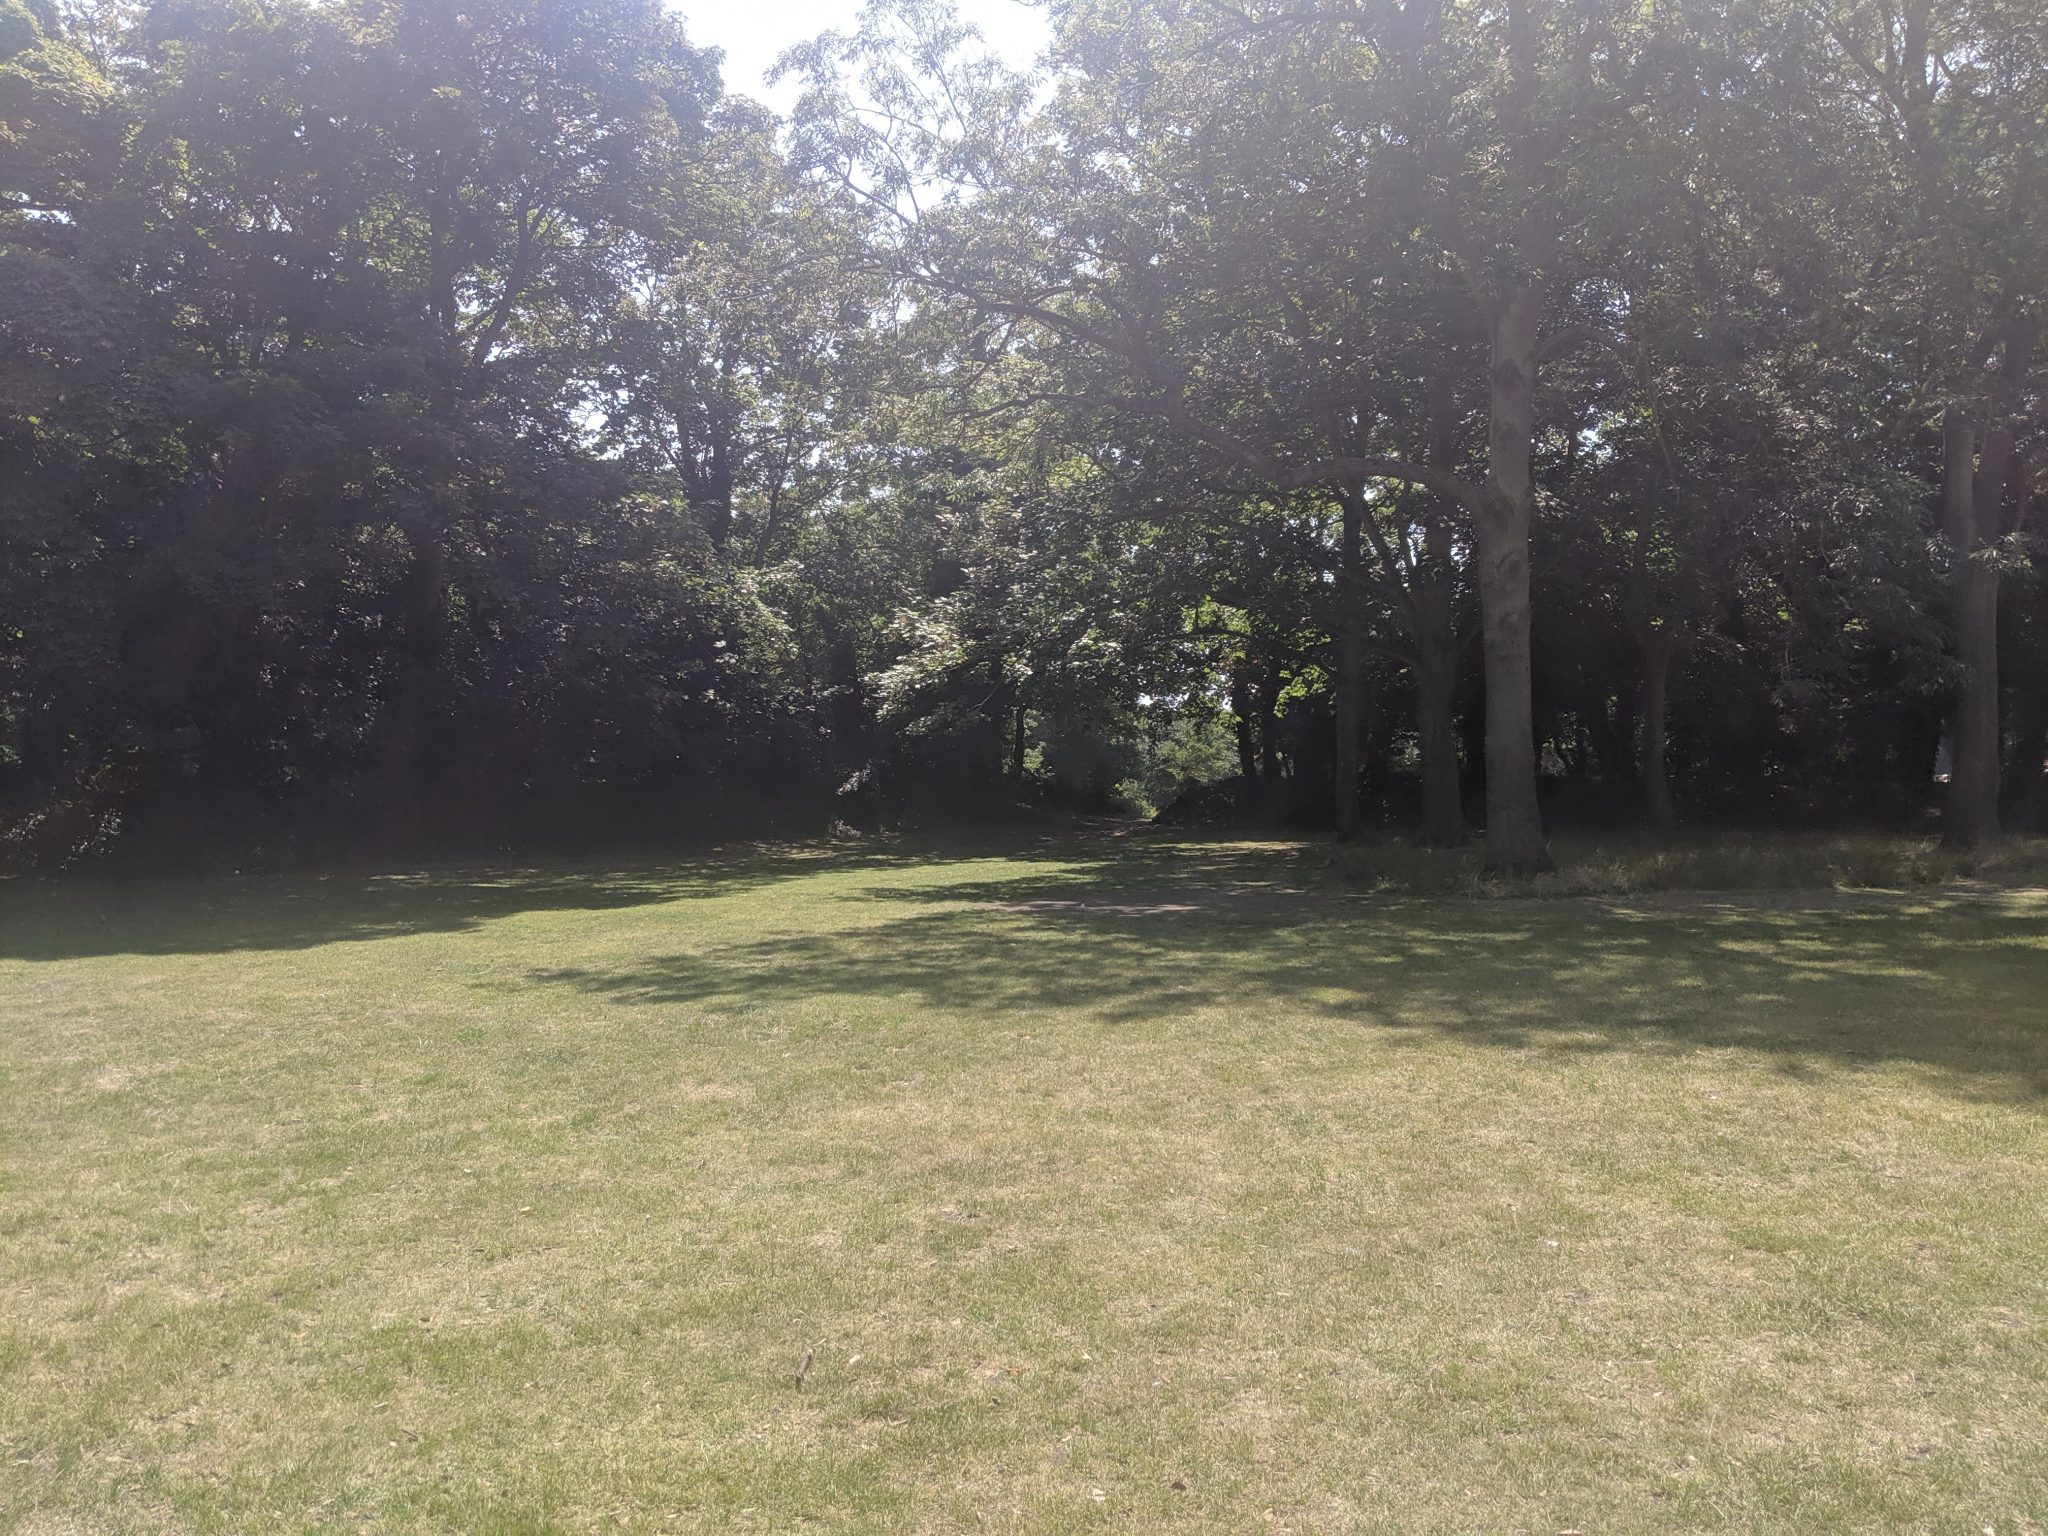 Large green open spaces separated by trees at King George VI Park